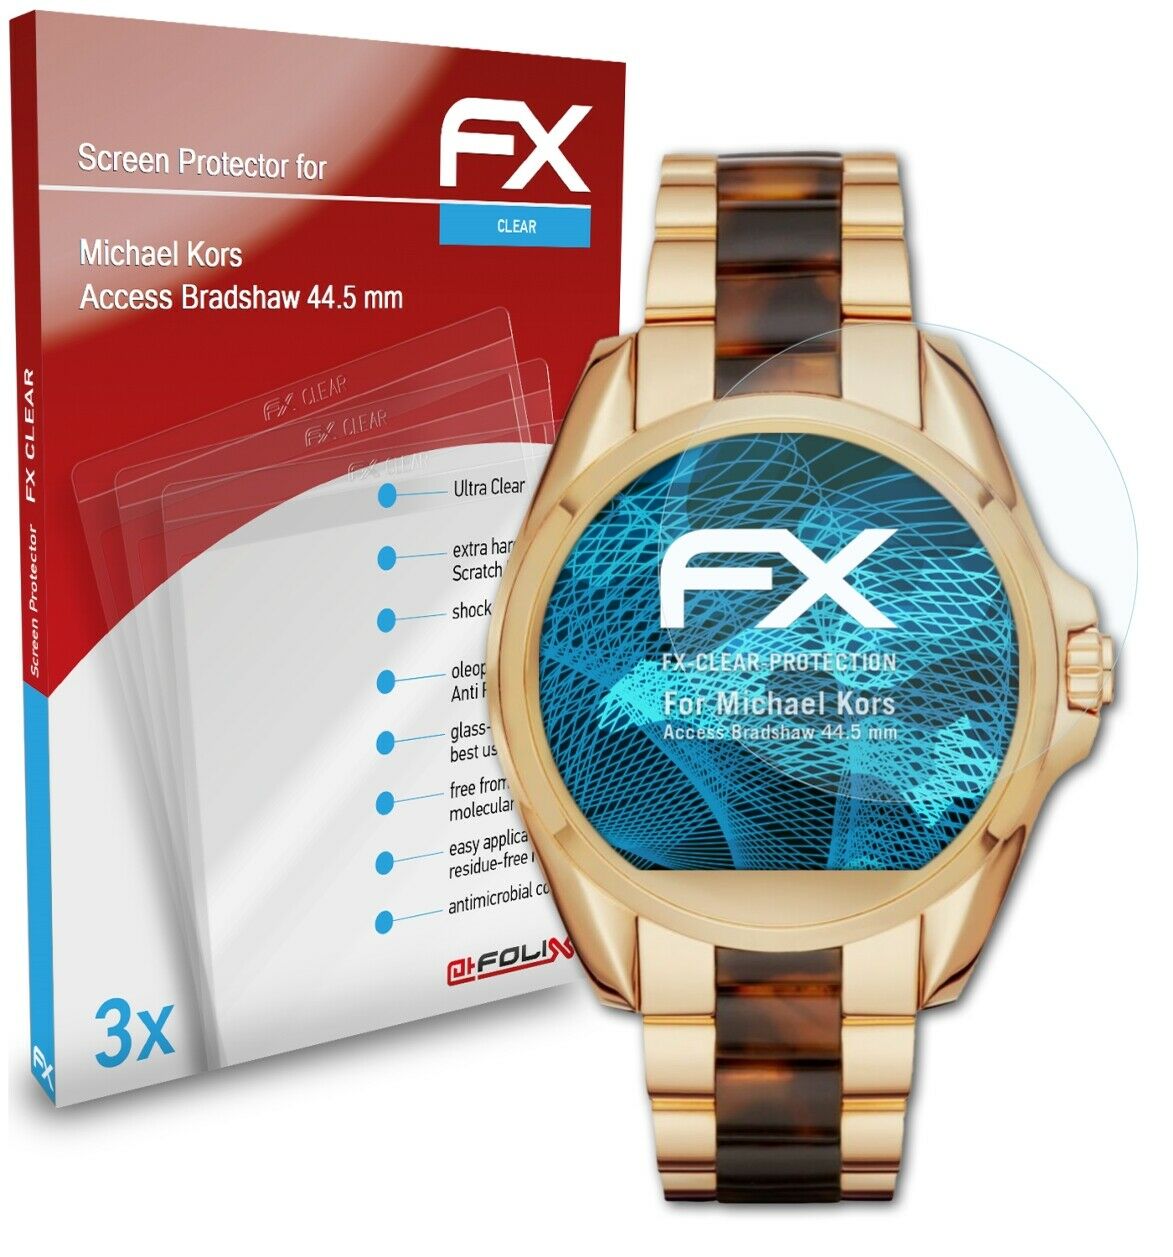 atFoliX 3x Screen Protector for Michael Kors Access Bradshaw 44.5 mm clear